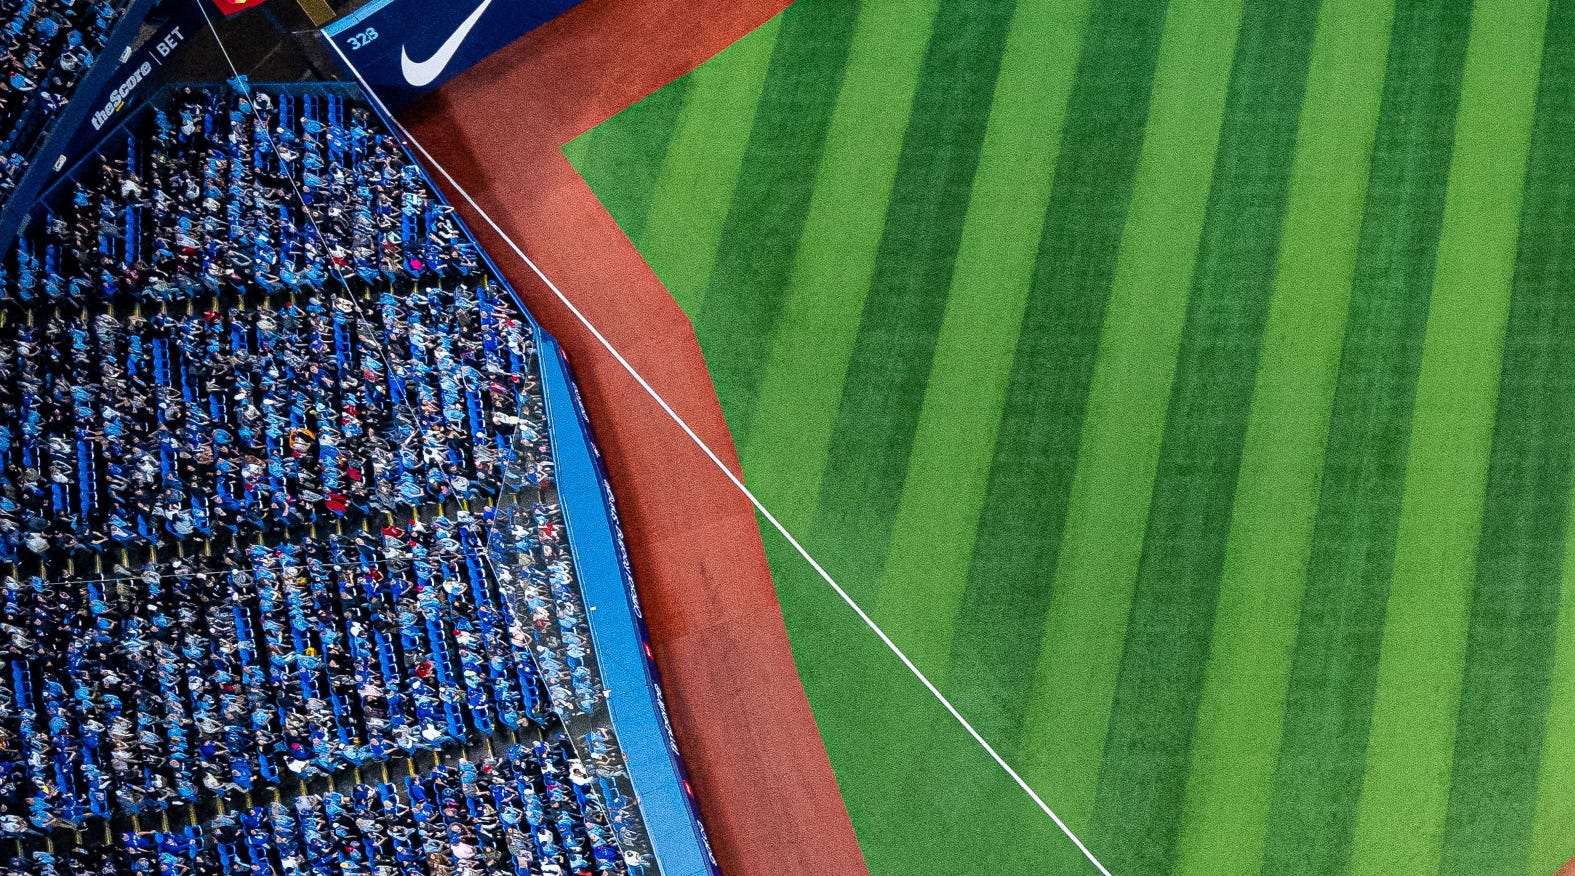 Blue Jays to reduce foul territory on field as part of 100 level renovations